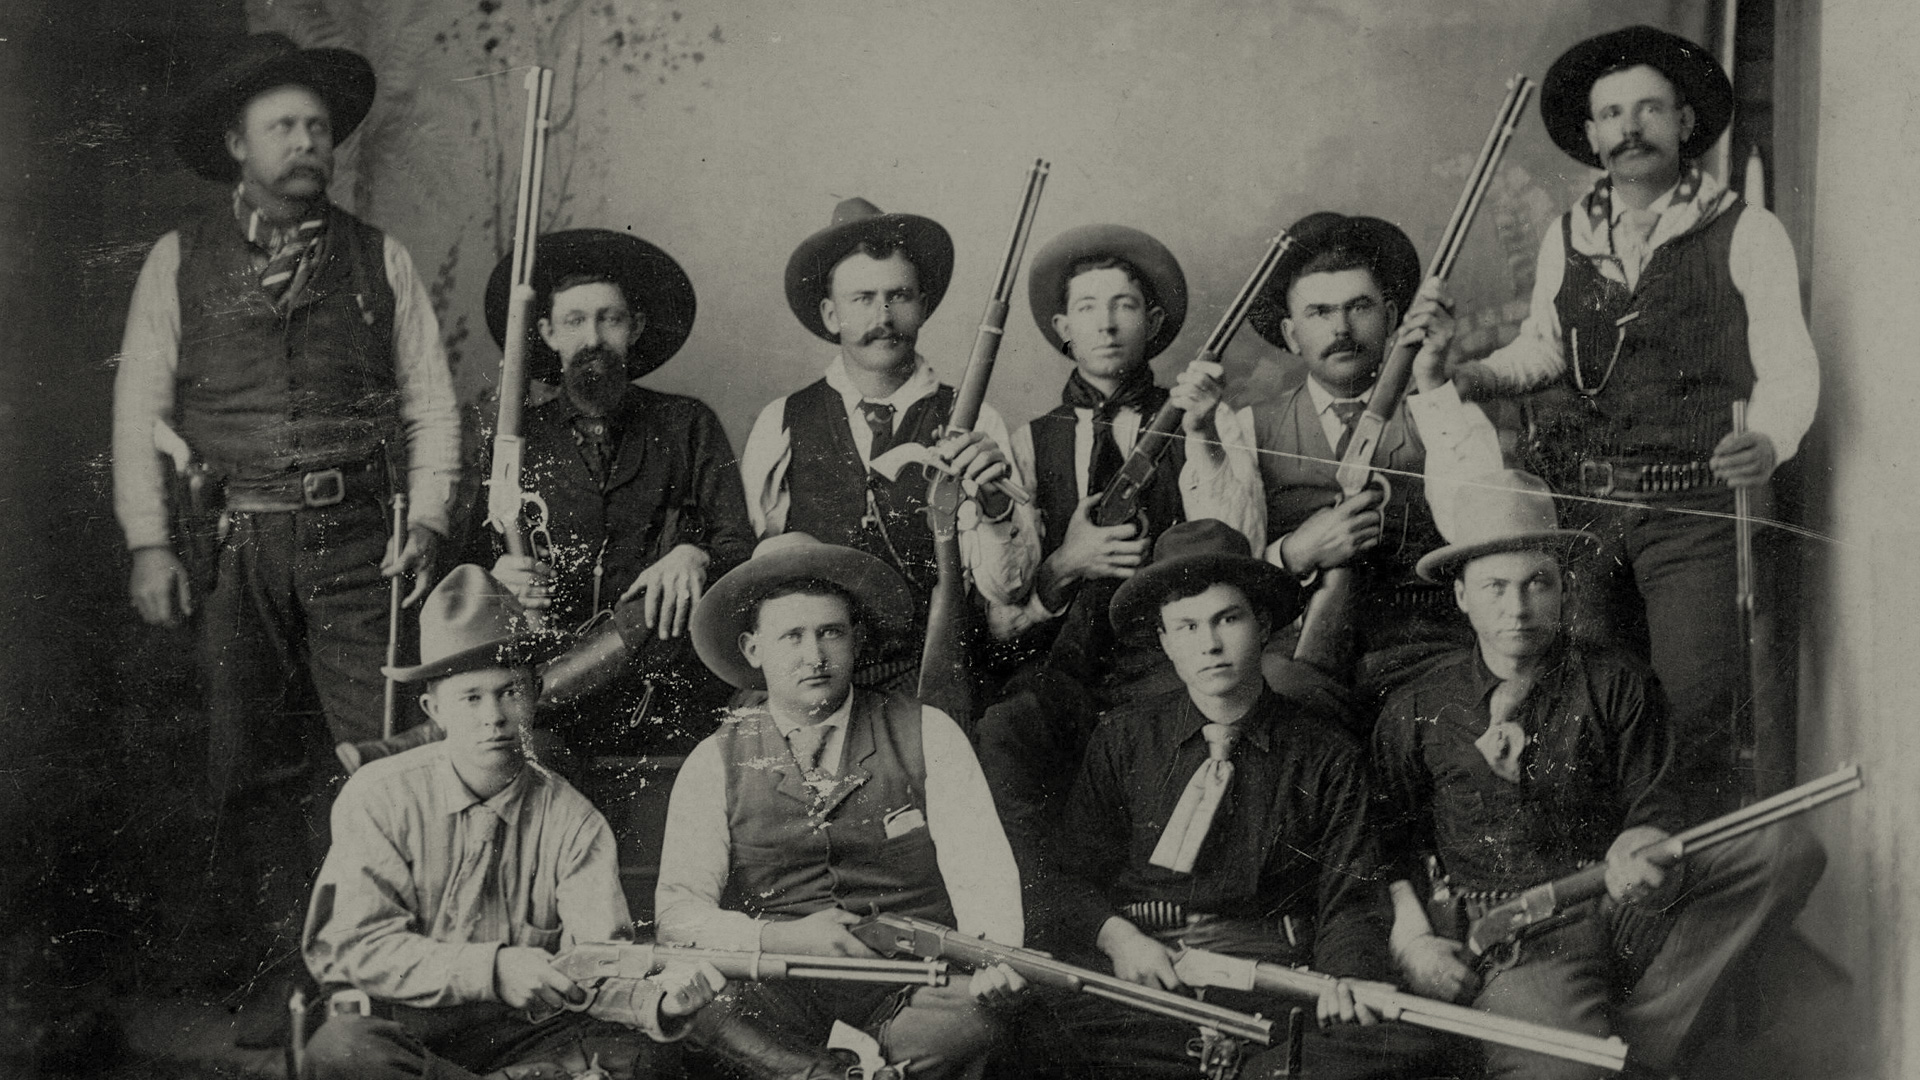 The Texas Rangers: 200 Years Of Justice | An Official Journal Of The NRA